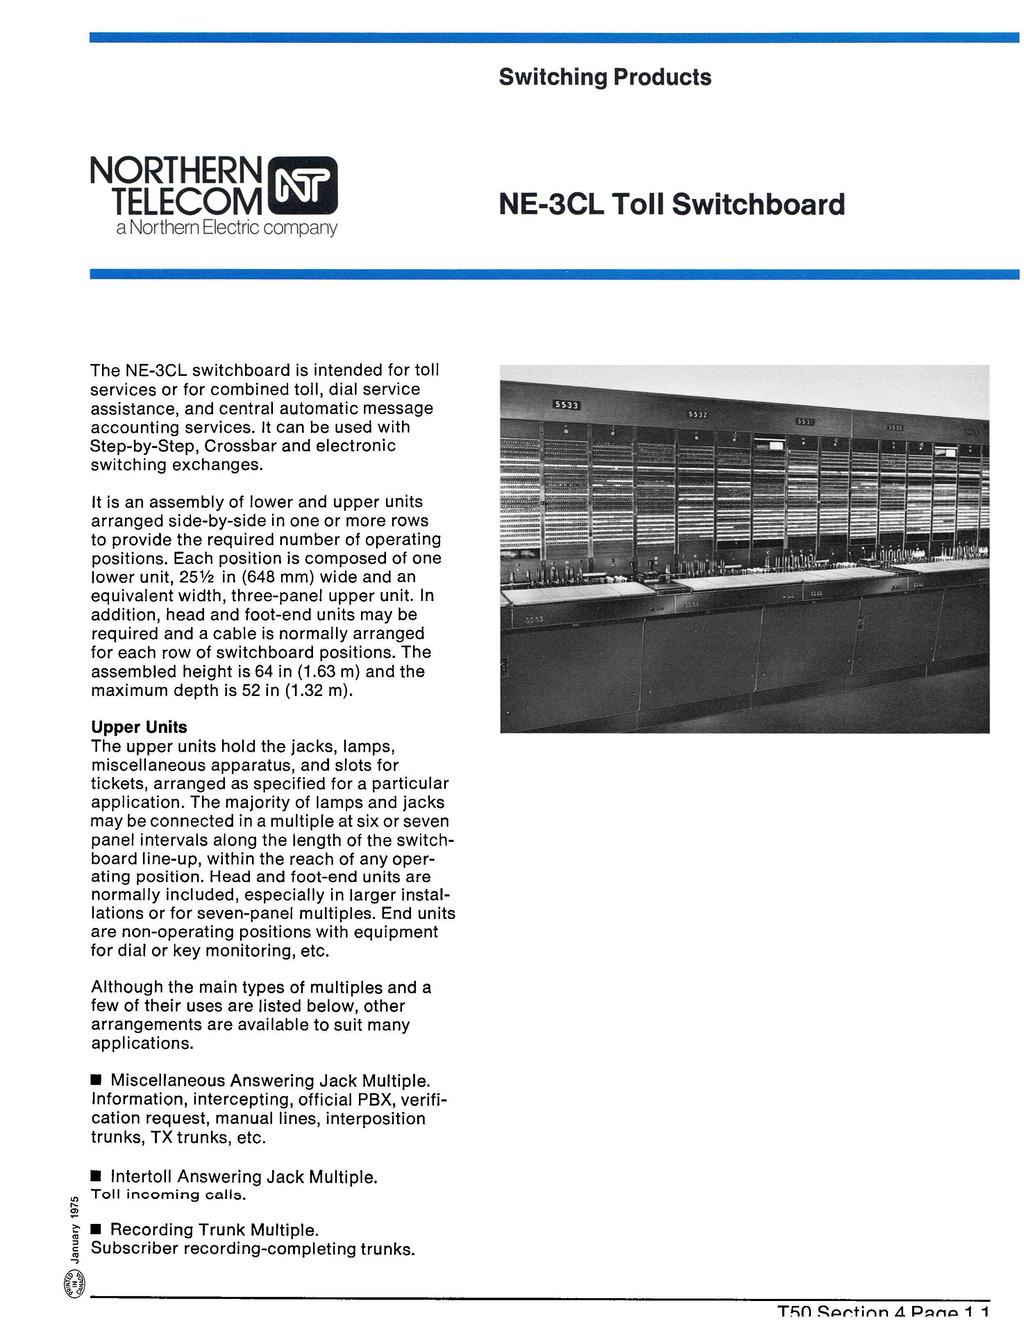 NE-3CL Toll Switchboard The NE-3CL switchboard is intended for toll services or for combined toll, dial service assistance, and central automatic message accounting services.